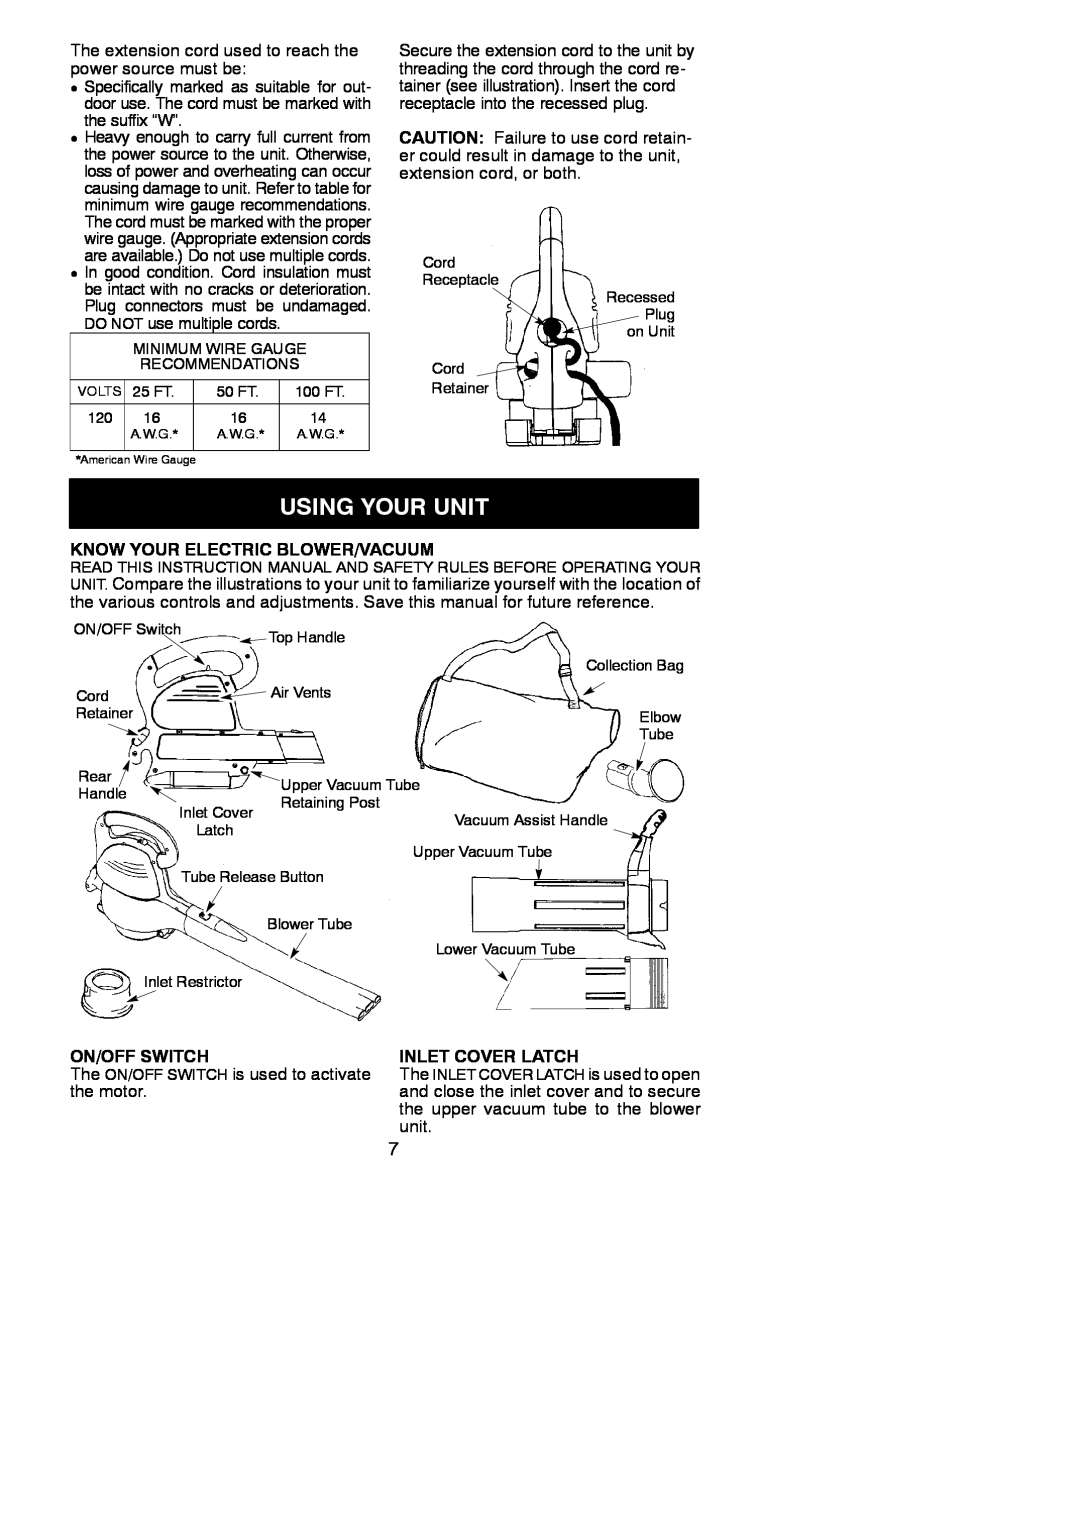 Weed Eater 545186750 instruction manual Using Your Unit, Know Your Electric Blower/Vacuum, On/Off Switch, Inlet Cover Latch 